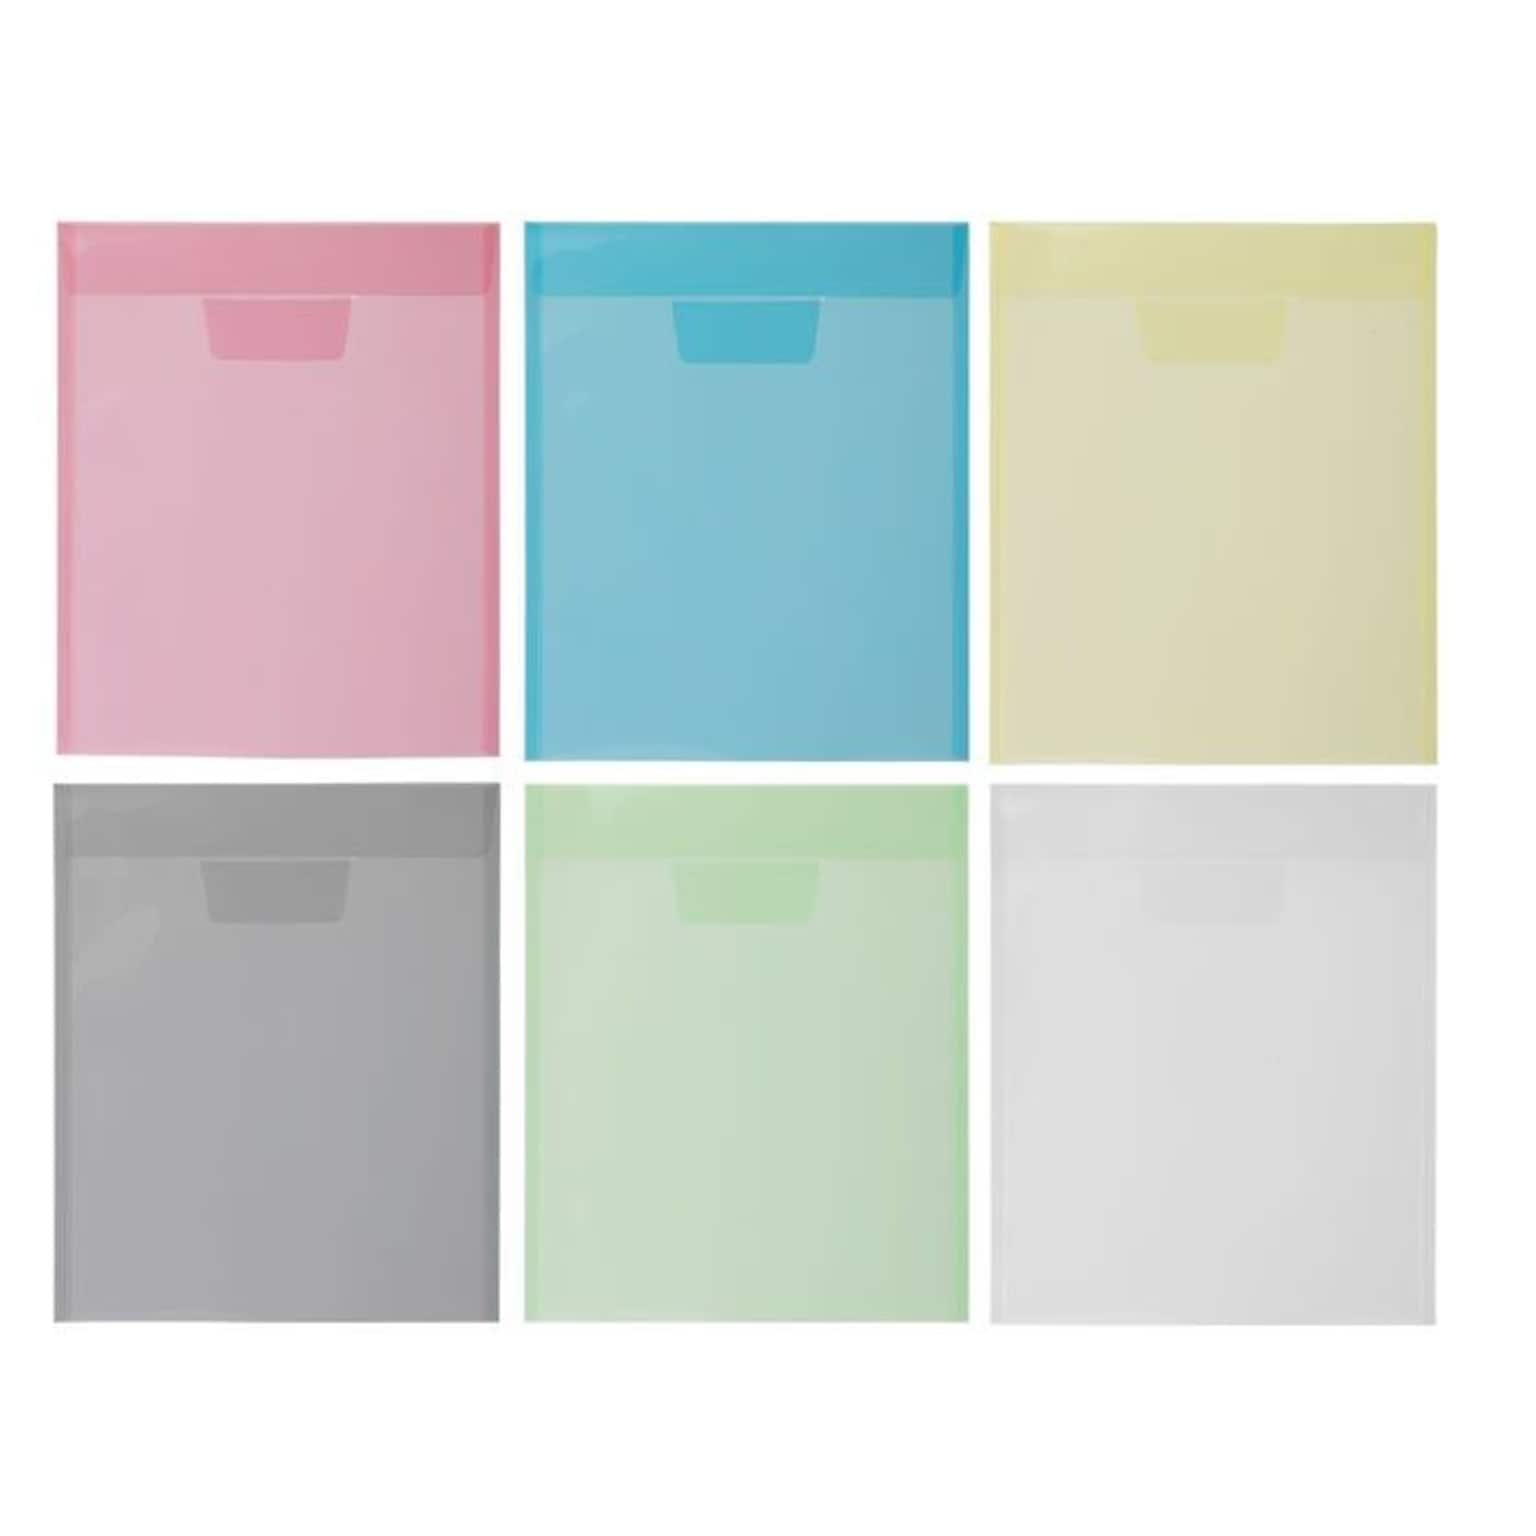 JAM PAPER Plastic Envelopes with Tuck Flap Closure, Letter Open End, 9 7/8 x 11 3/4, Assorted Colors, 6/Pack (15438683)